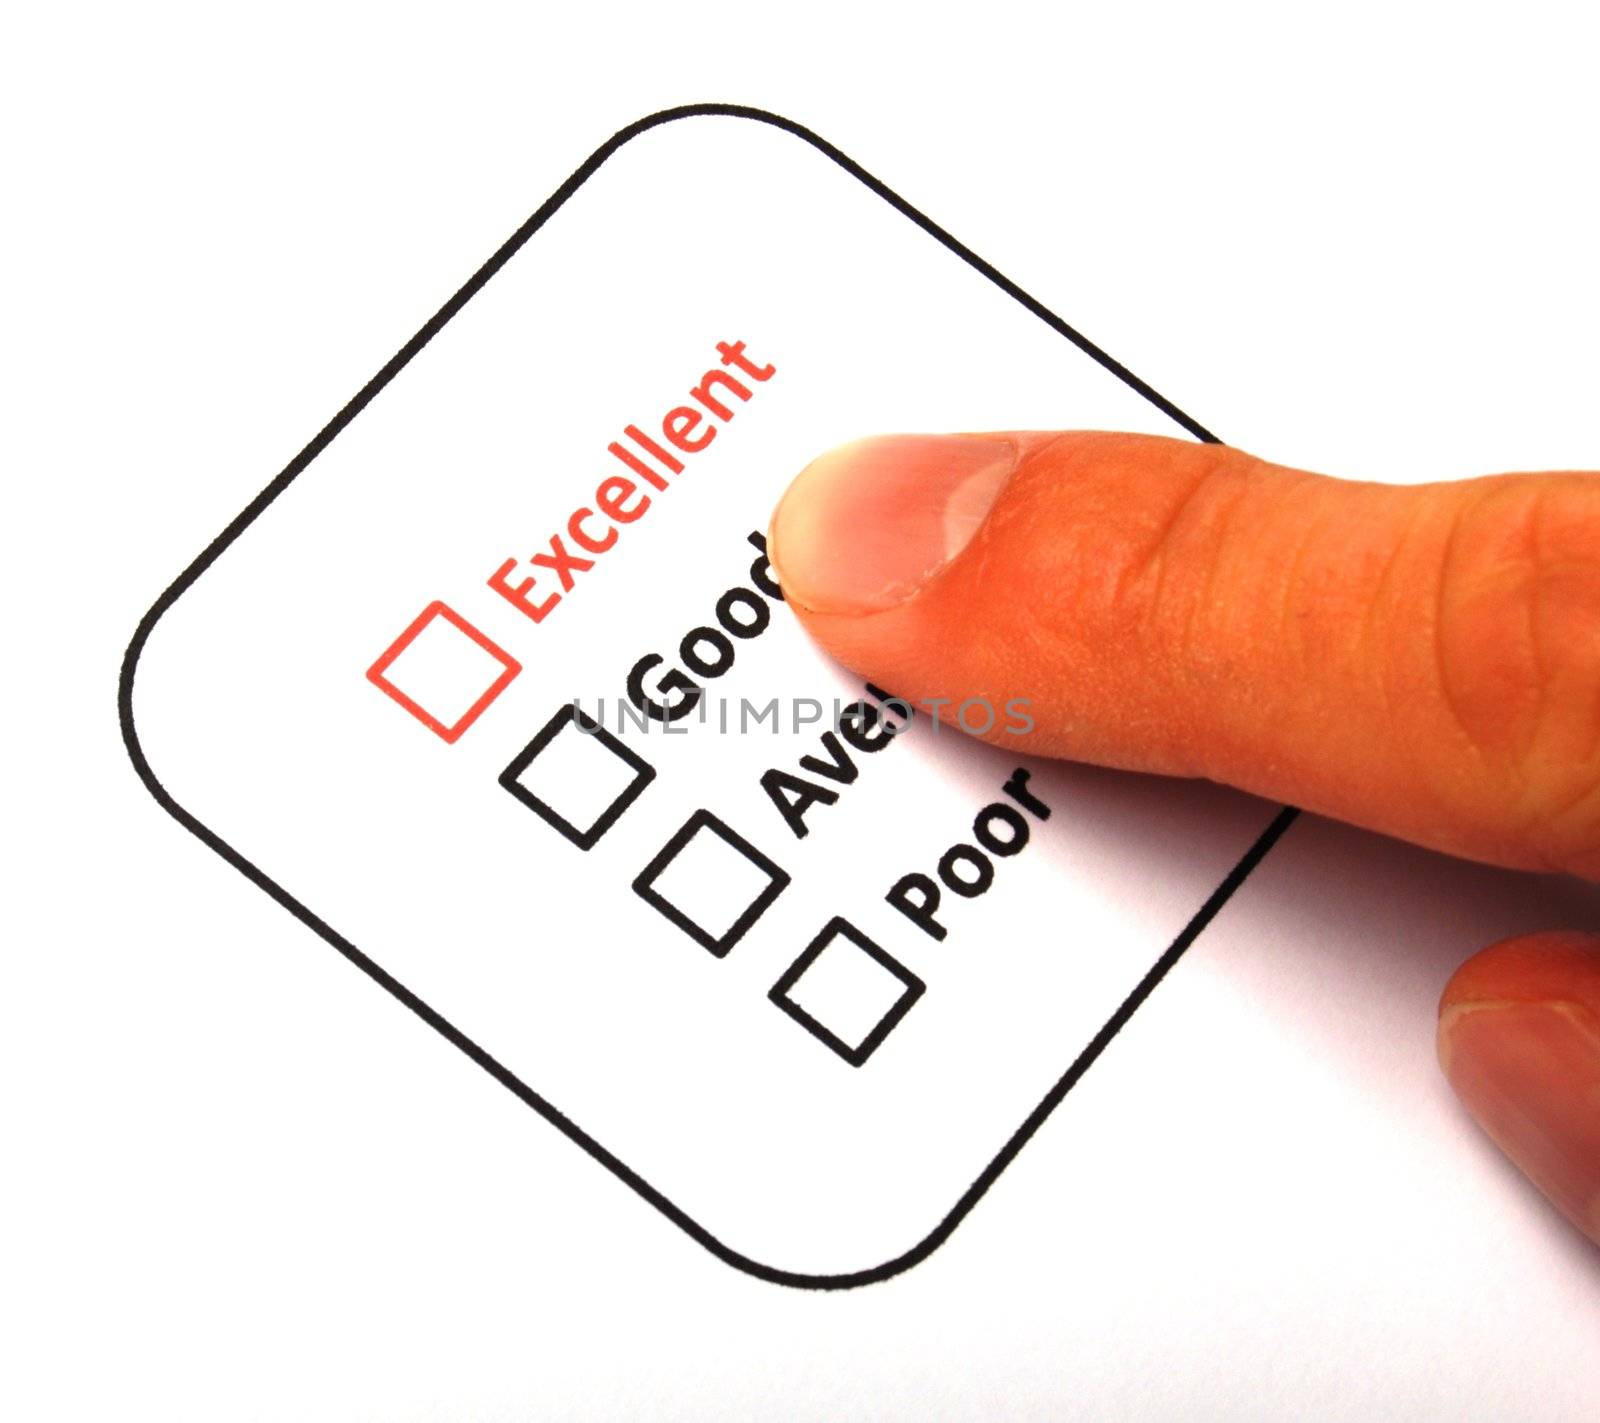 checkbox and red pen showing customer service survey or satisfaction concept to improve sales